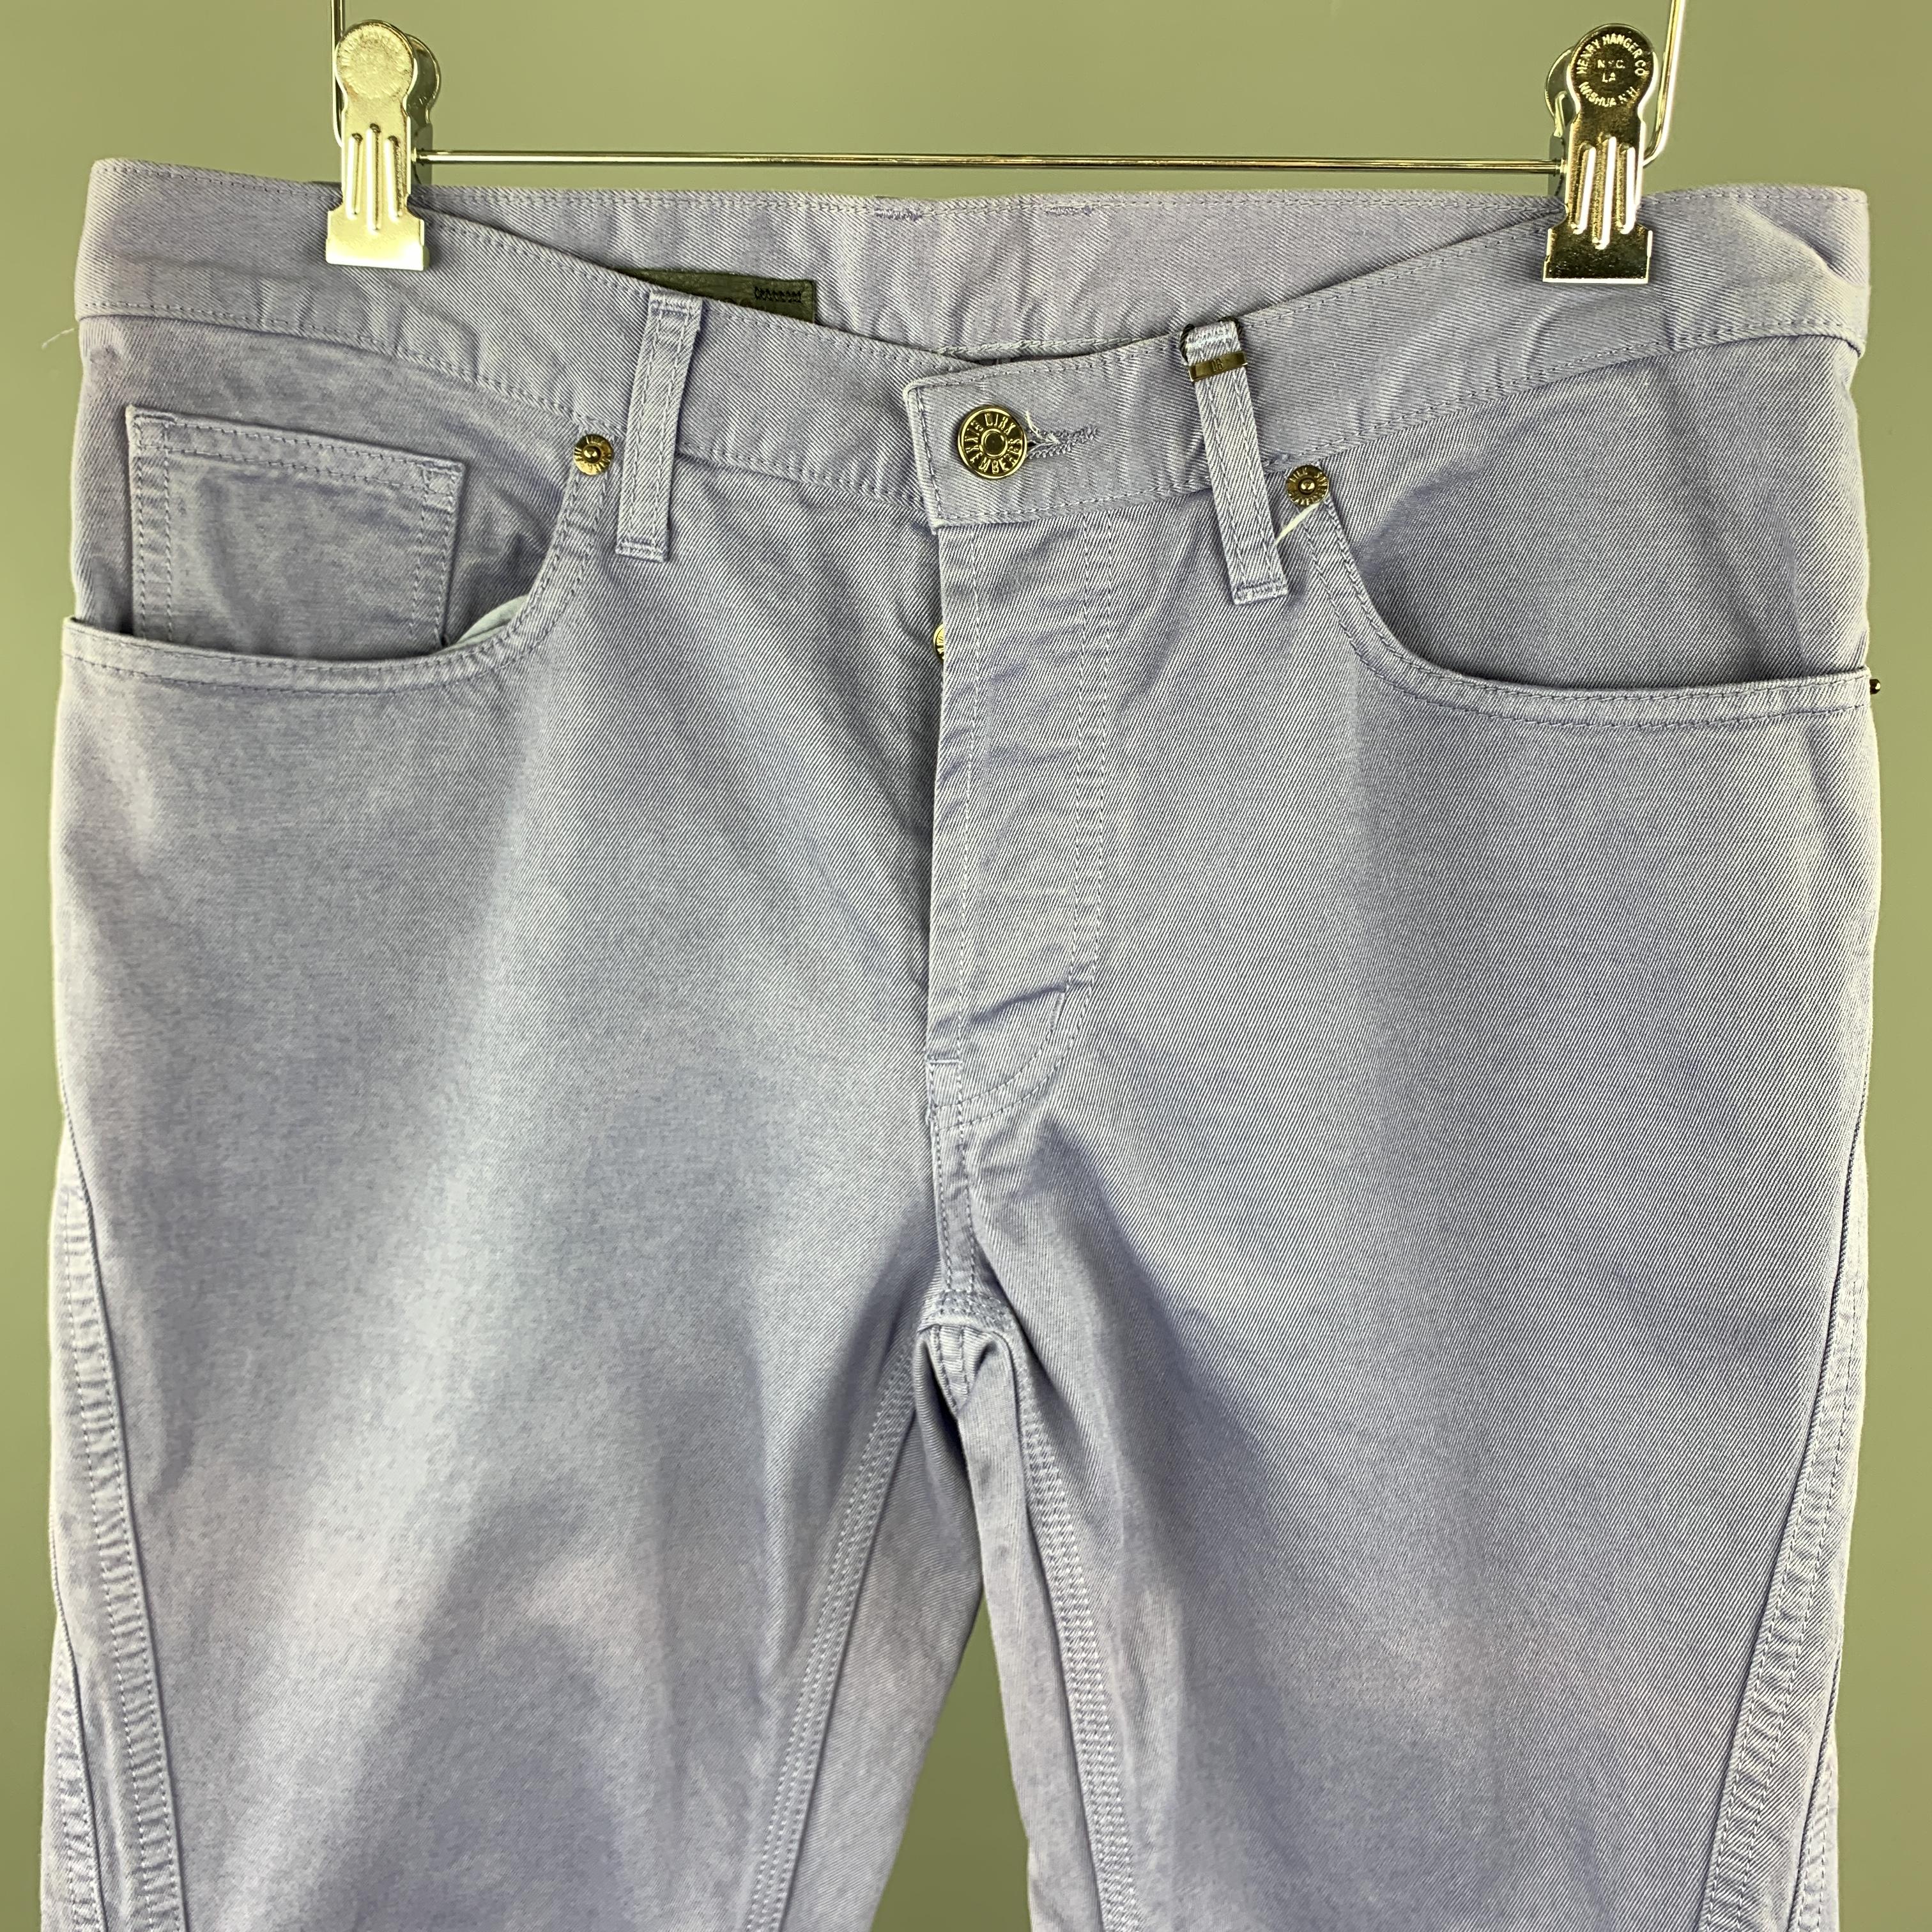 DIRK BIKKEMBERGS jeans come in light purple denim with a button fly double side seams, and silver tone back plaque. Made in Italy.

New with Tags.
Marked: 30

Measurements:

Waist: 33 in.
Rise: 9 in.
Inseam: 28 in.